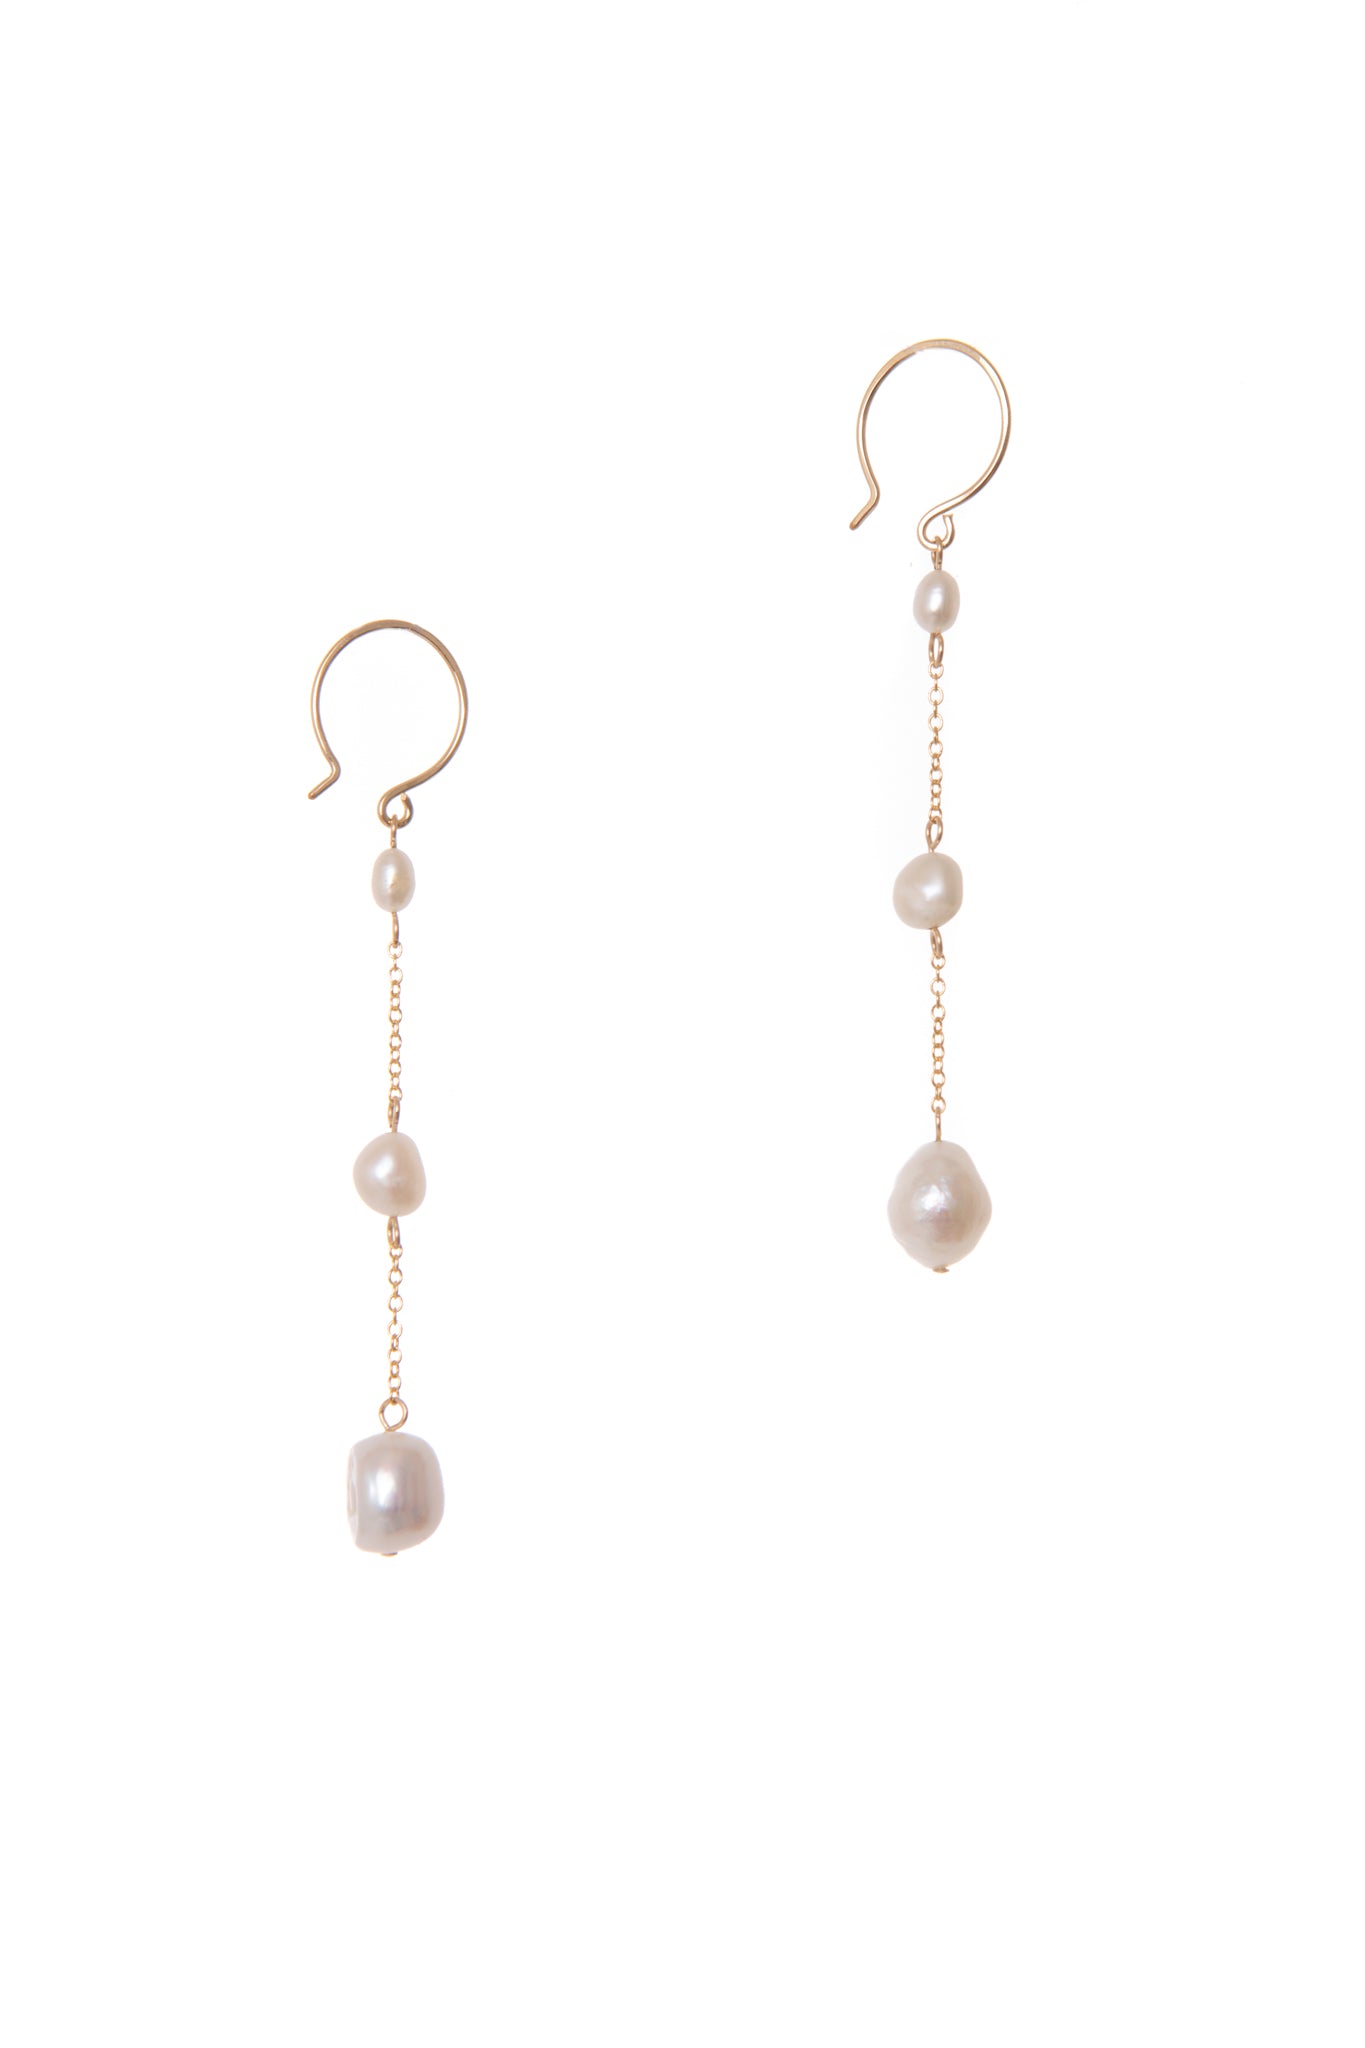 Trois pearl earrings are crafted with freshwater pearls of graduating sizes and 14k yellow gold-filled chain for a classic yet modern look.